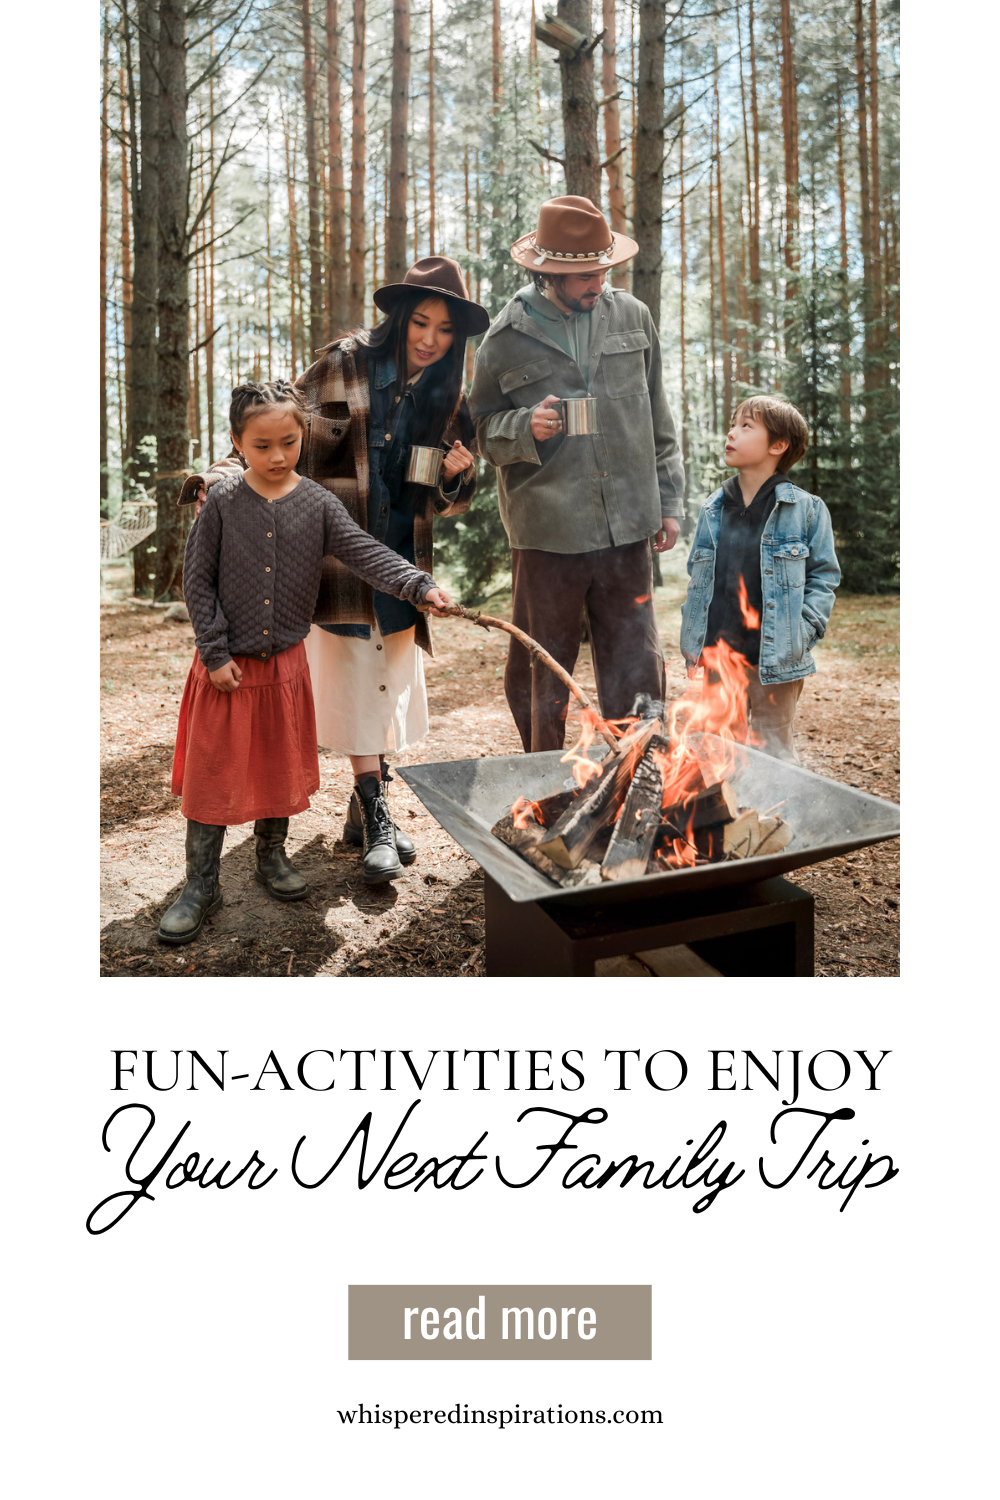 A family is enjoying a camping trip. This article provides 11 fun activities to enjoy your next fall family trip to its fullest.